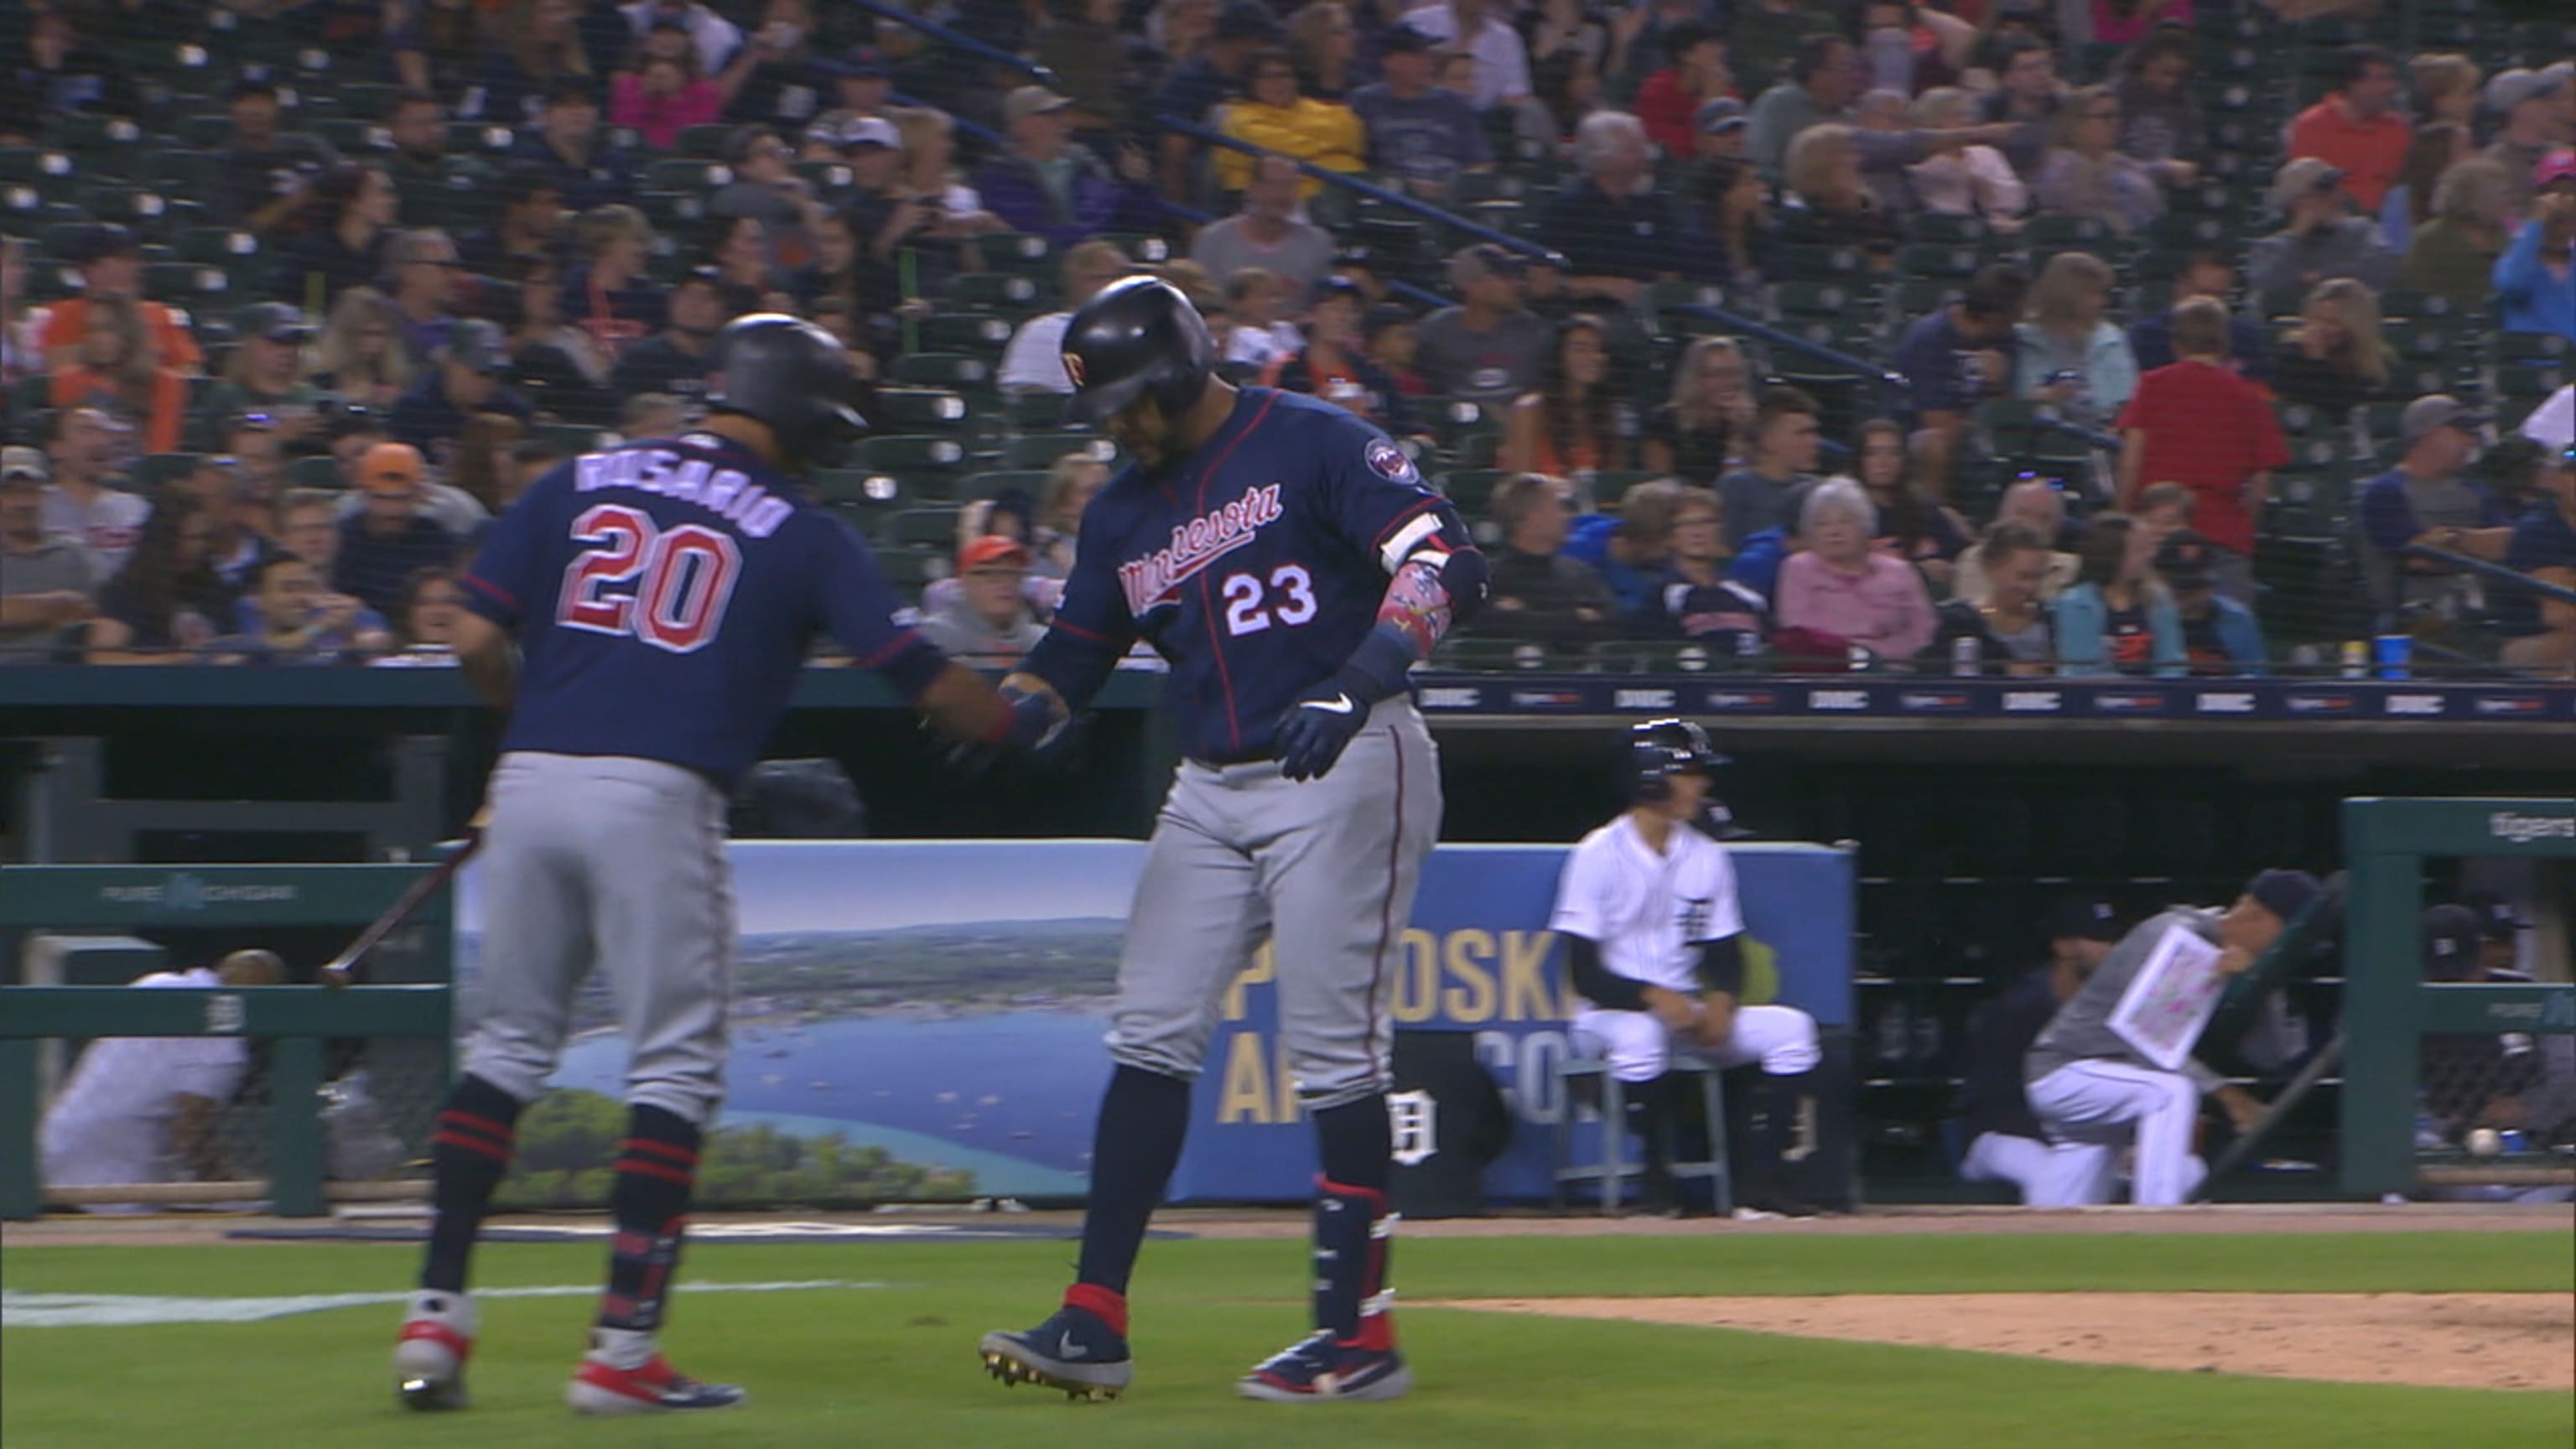 Land of 10,000 Rakes': Twins home run celebration gets A+ North